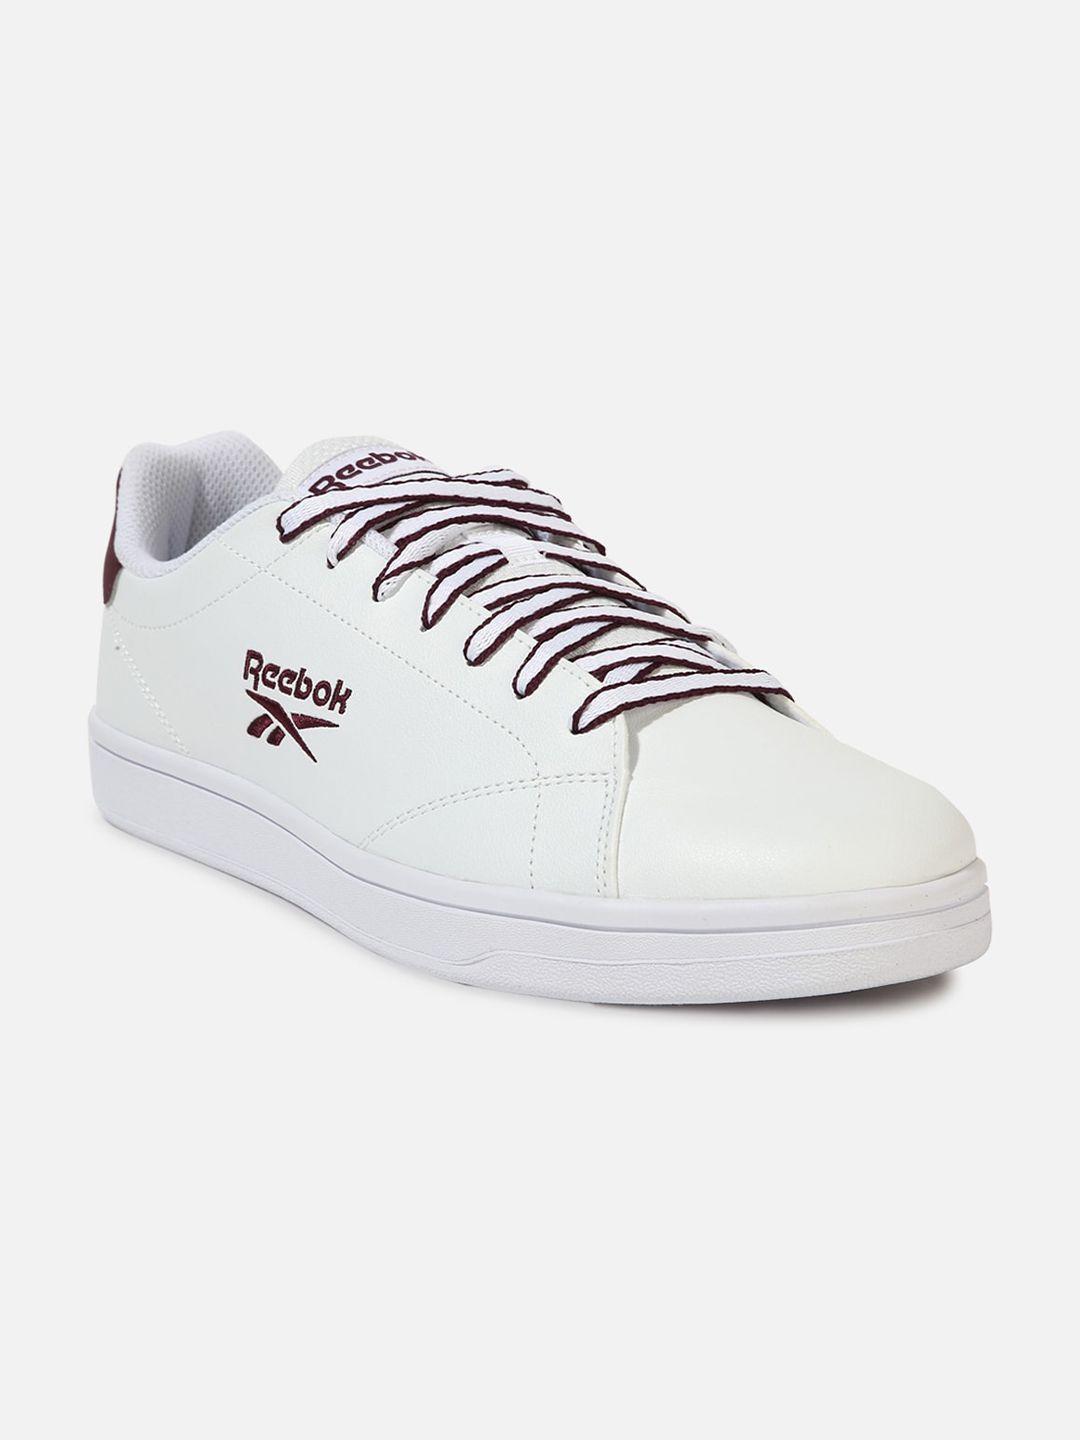 reebok-men-complete-leather-sports-shoes